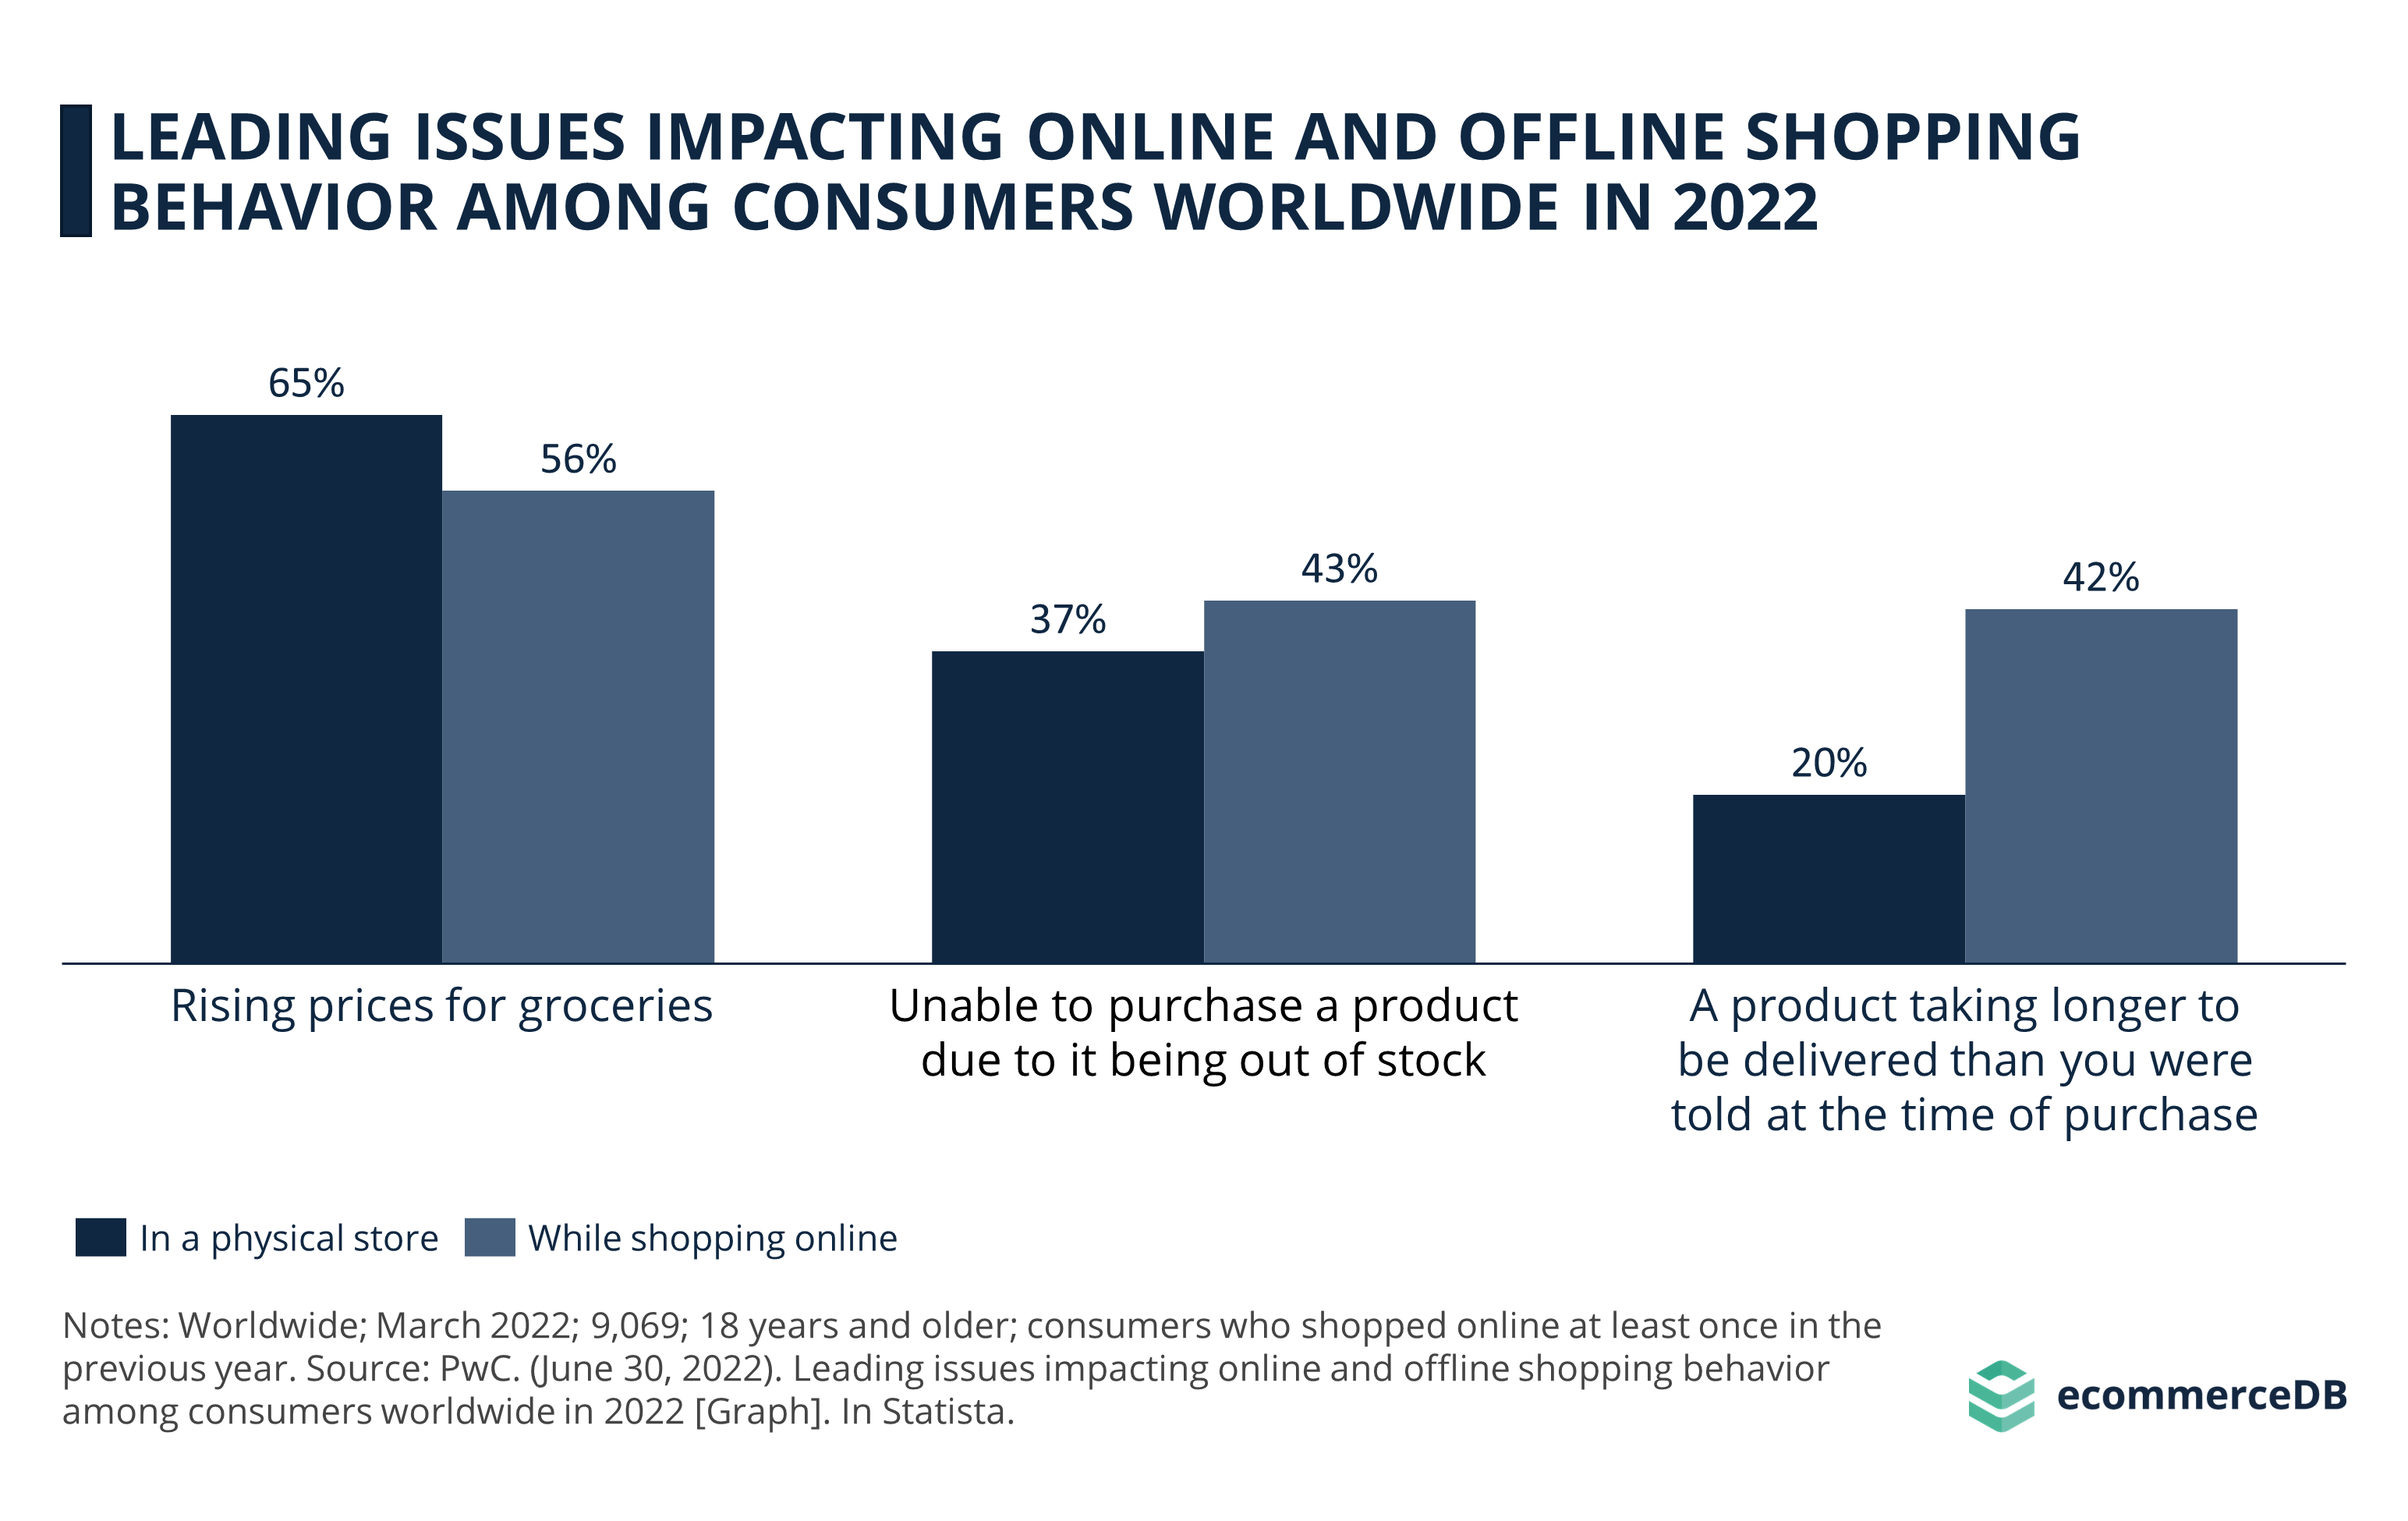 Leading Issues Impacting Online and Offline Shopping Behavior Among Consumers Worldwide in 2022